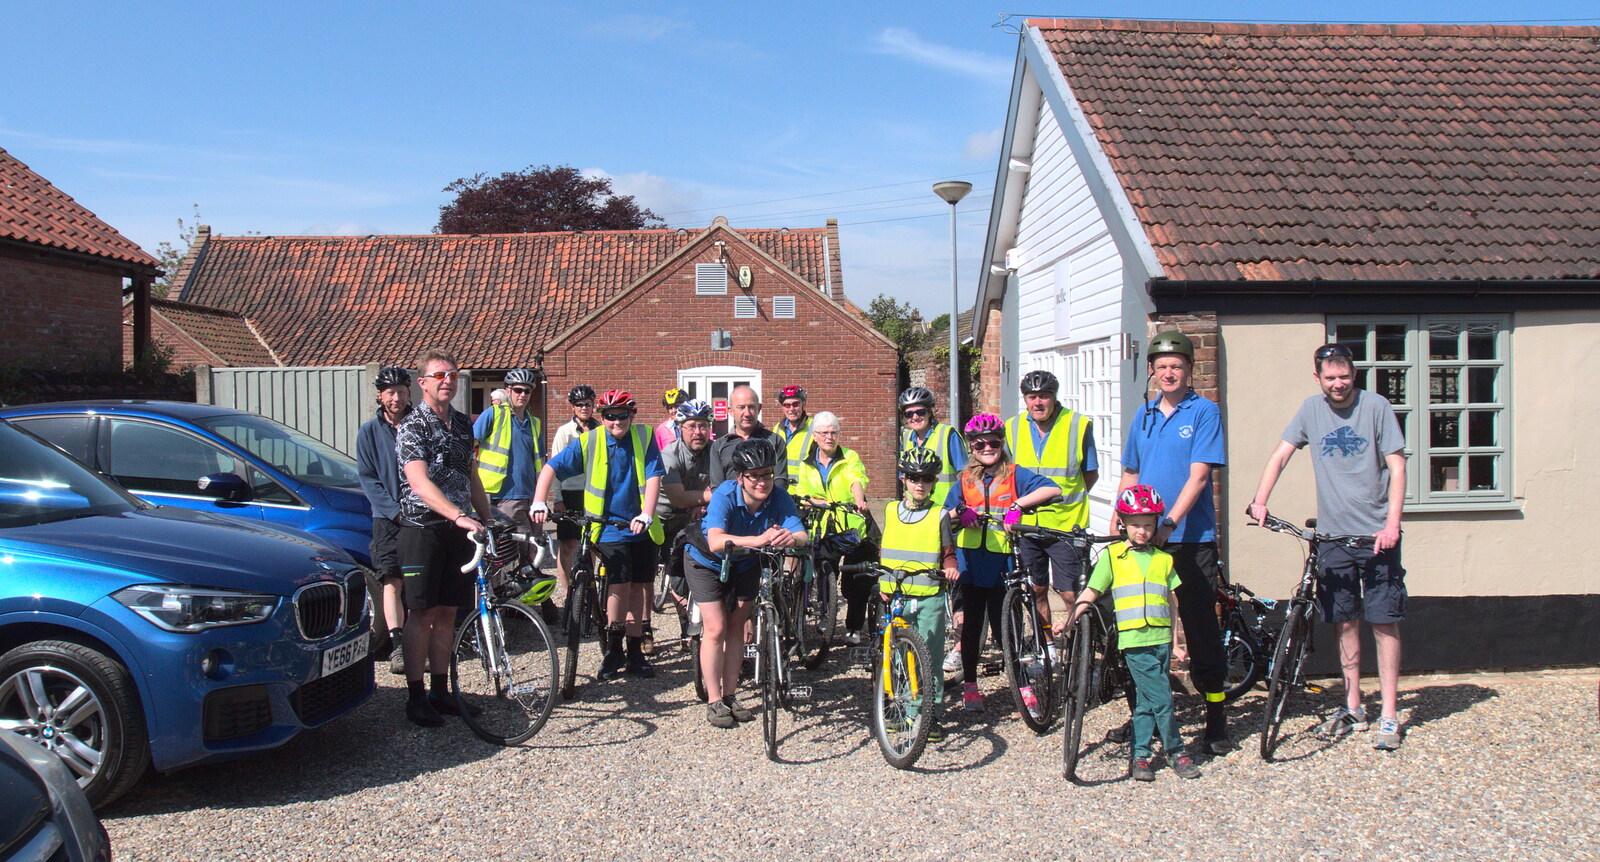 A group photo of the BSCC from The BSCC Weekend Away, Holt, Norfolk - 12th May 2018